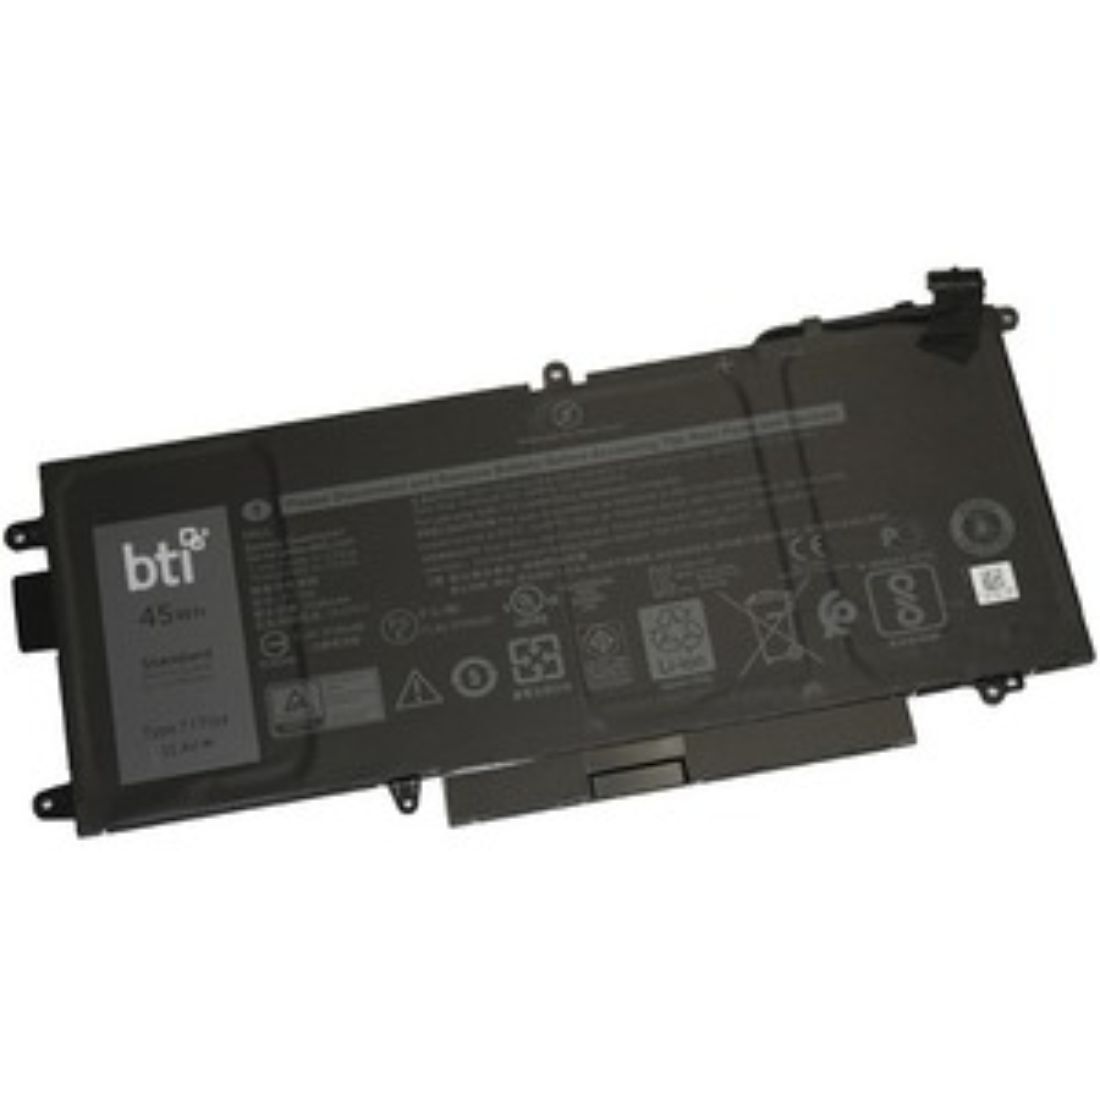 BTI Battery 3745mAh 11.4V Battery Replacement for Select Dell Laptops 71TG4-BTI